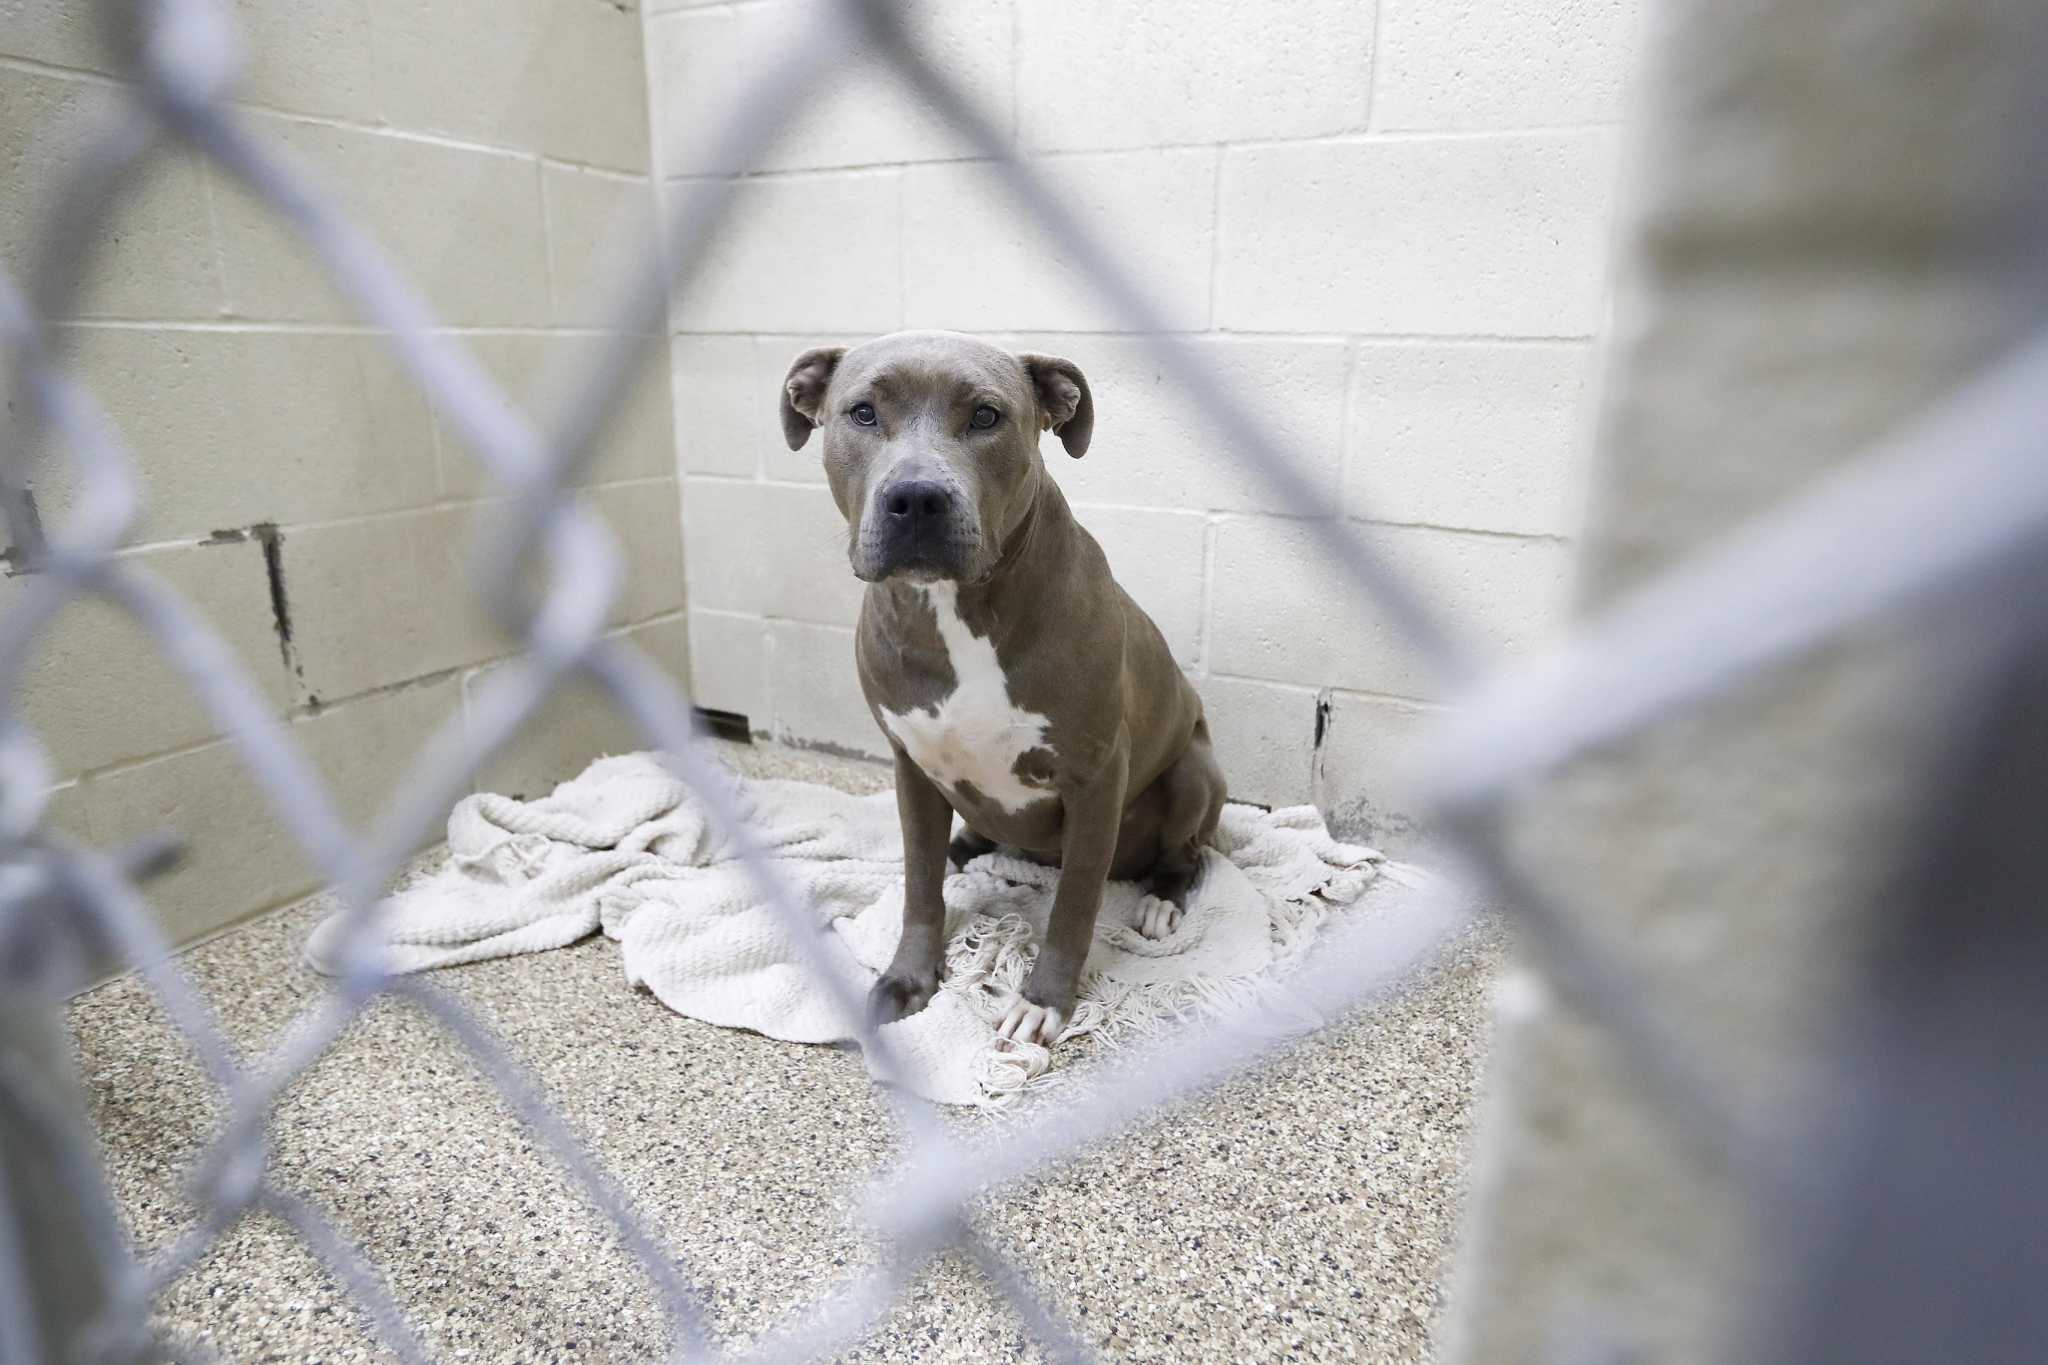 After national outcry over abuse claims, Katy Animal Control made changes.  Some say it's not enough.